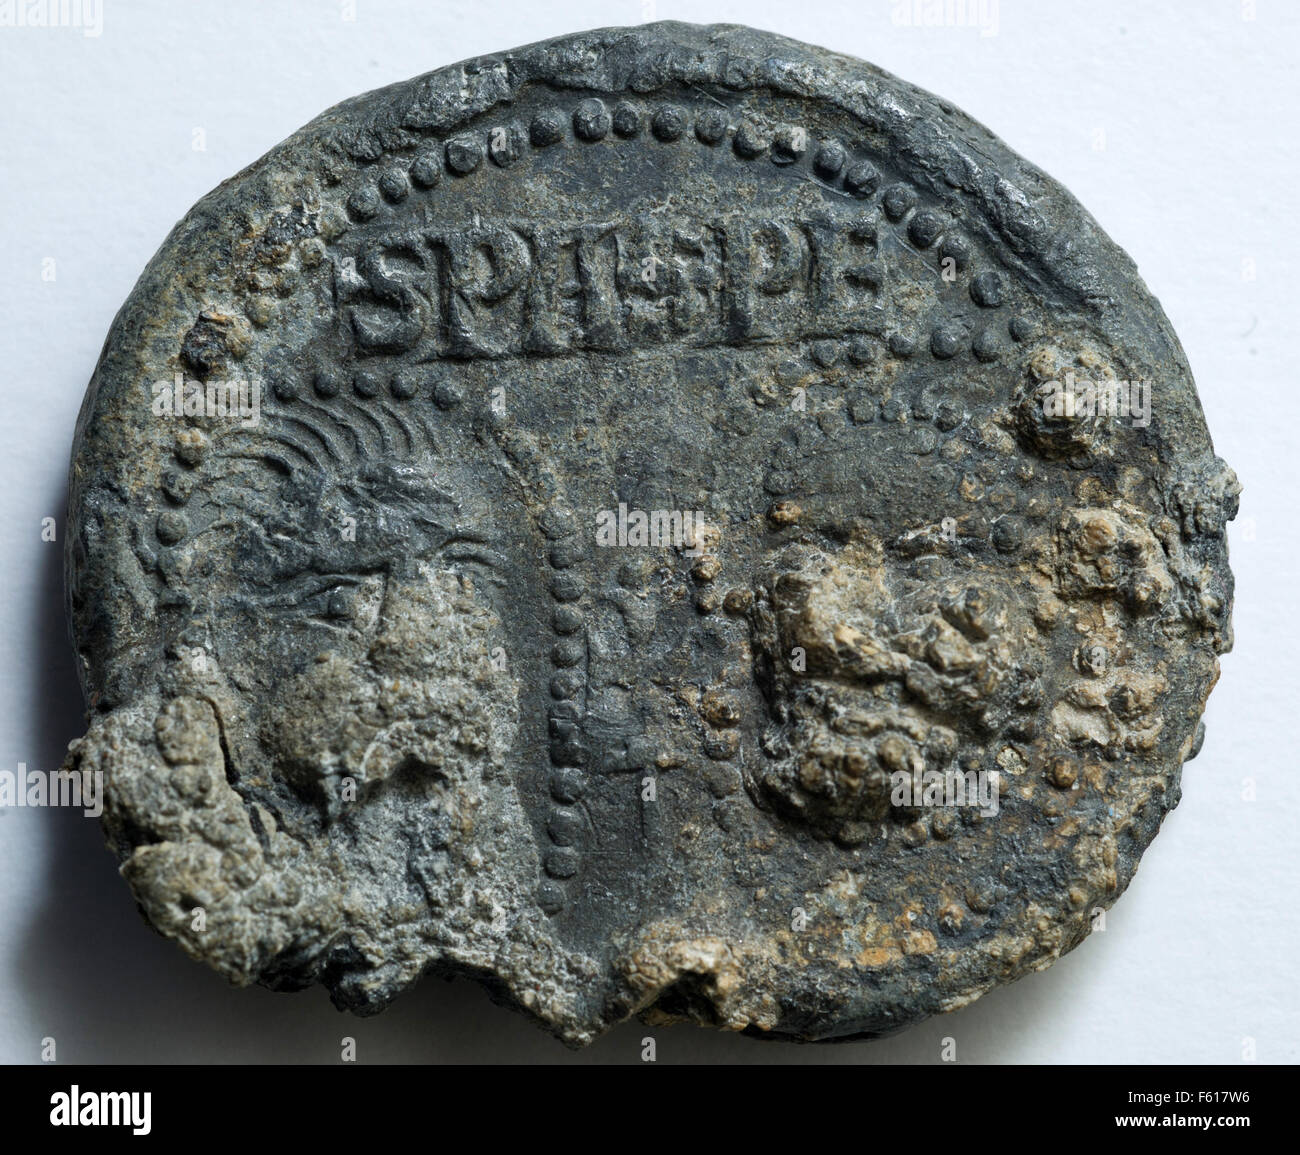 A papal seal of pope John XXII (1316-1334) discovered by archaeologists in the port of Greifswald, pictured in the town hall of Greifswald, Germany 10 November 2015. PHOTO: STEFAN SAUER/DPA Stock Photo